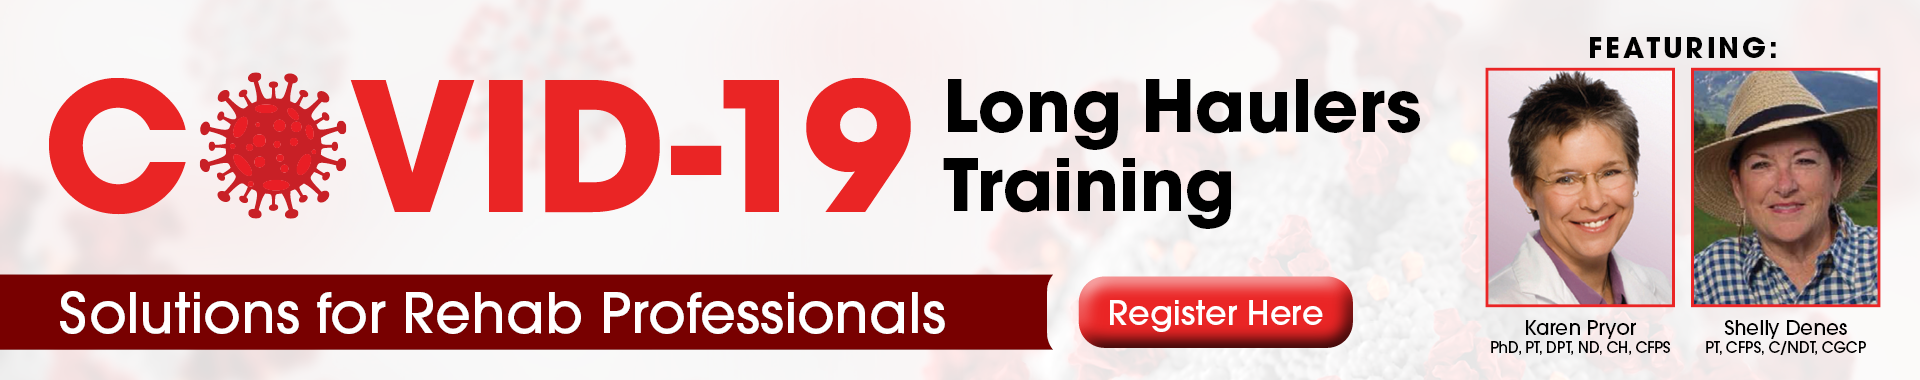 COVID Long Haul Training: Solutions for Rehab Professionals